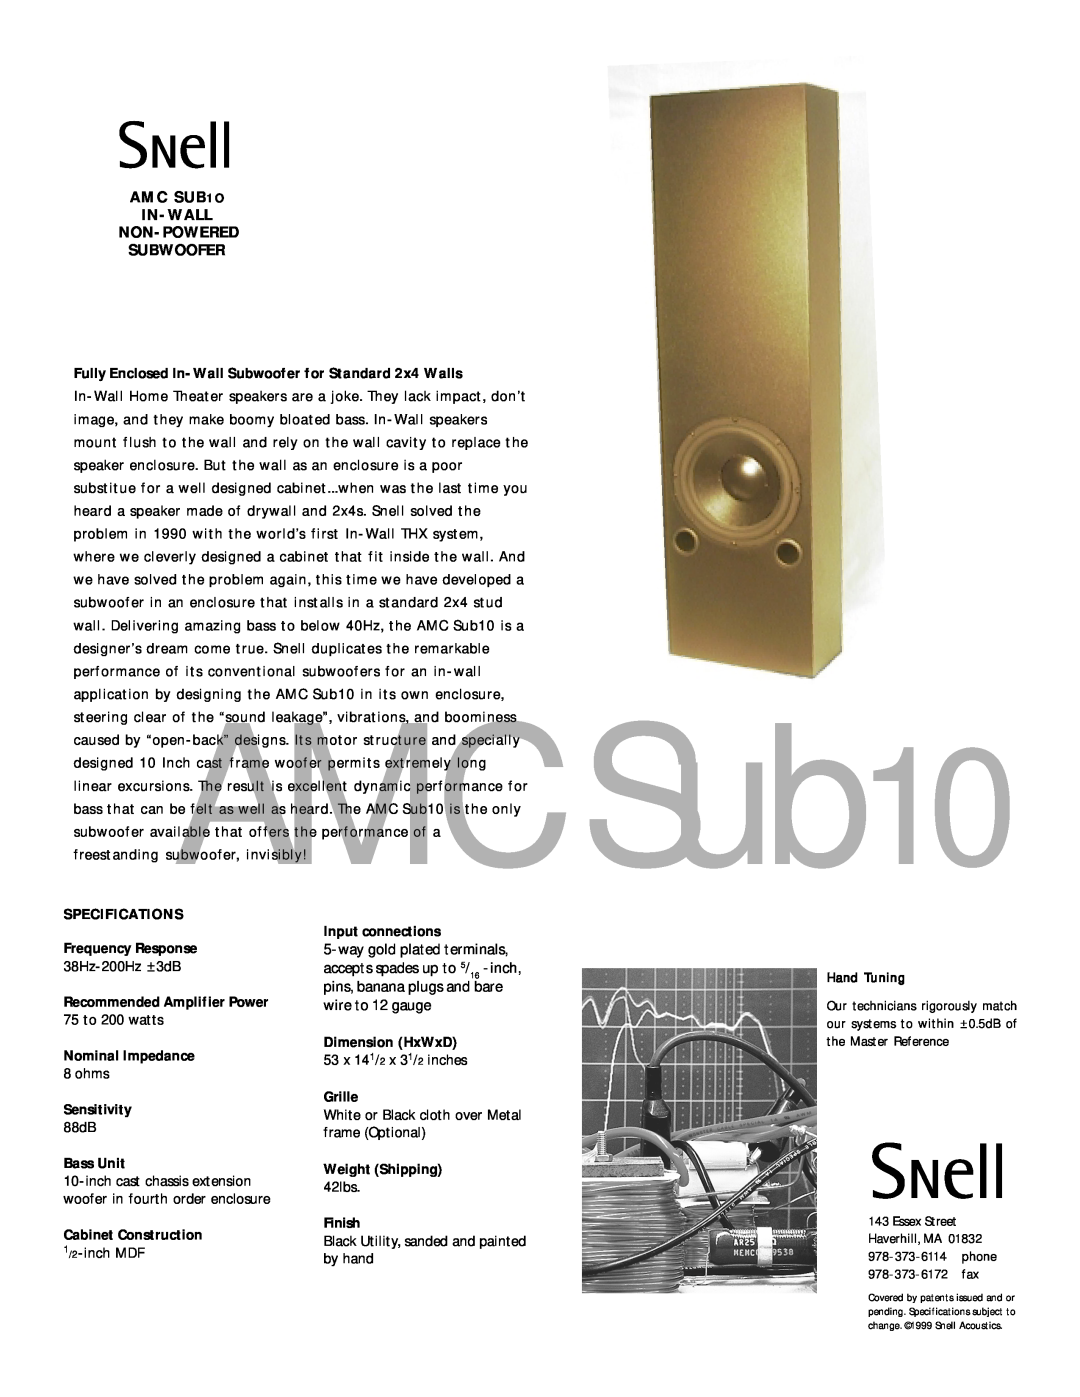 Snell Acoustics AMC Sub 10 specifications Sub10, AMC SUB1O IN-WALL NON-POWERED SUBWOOFER 